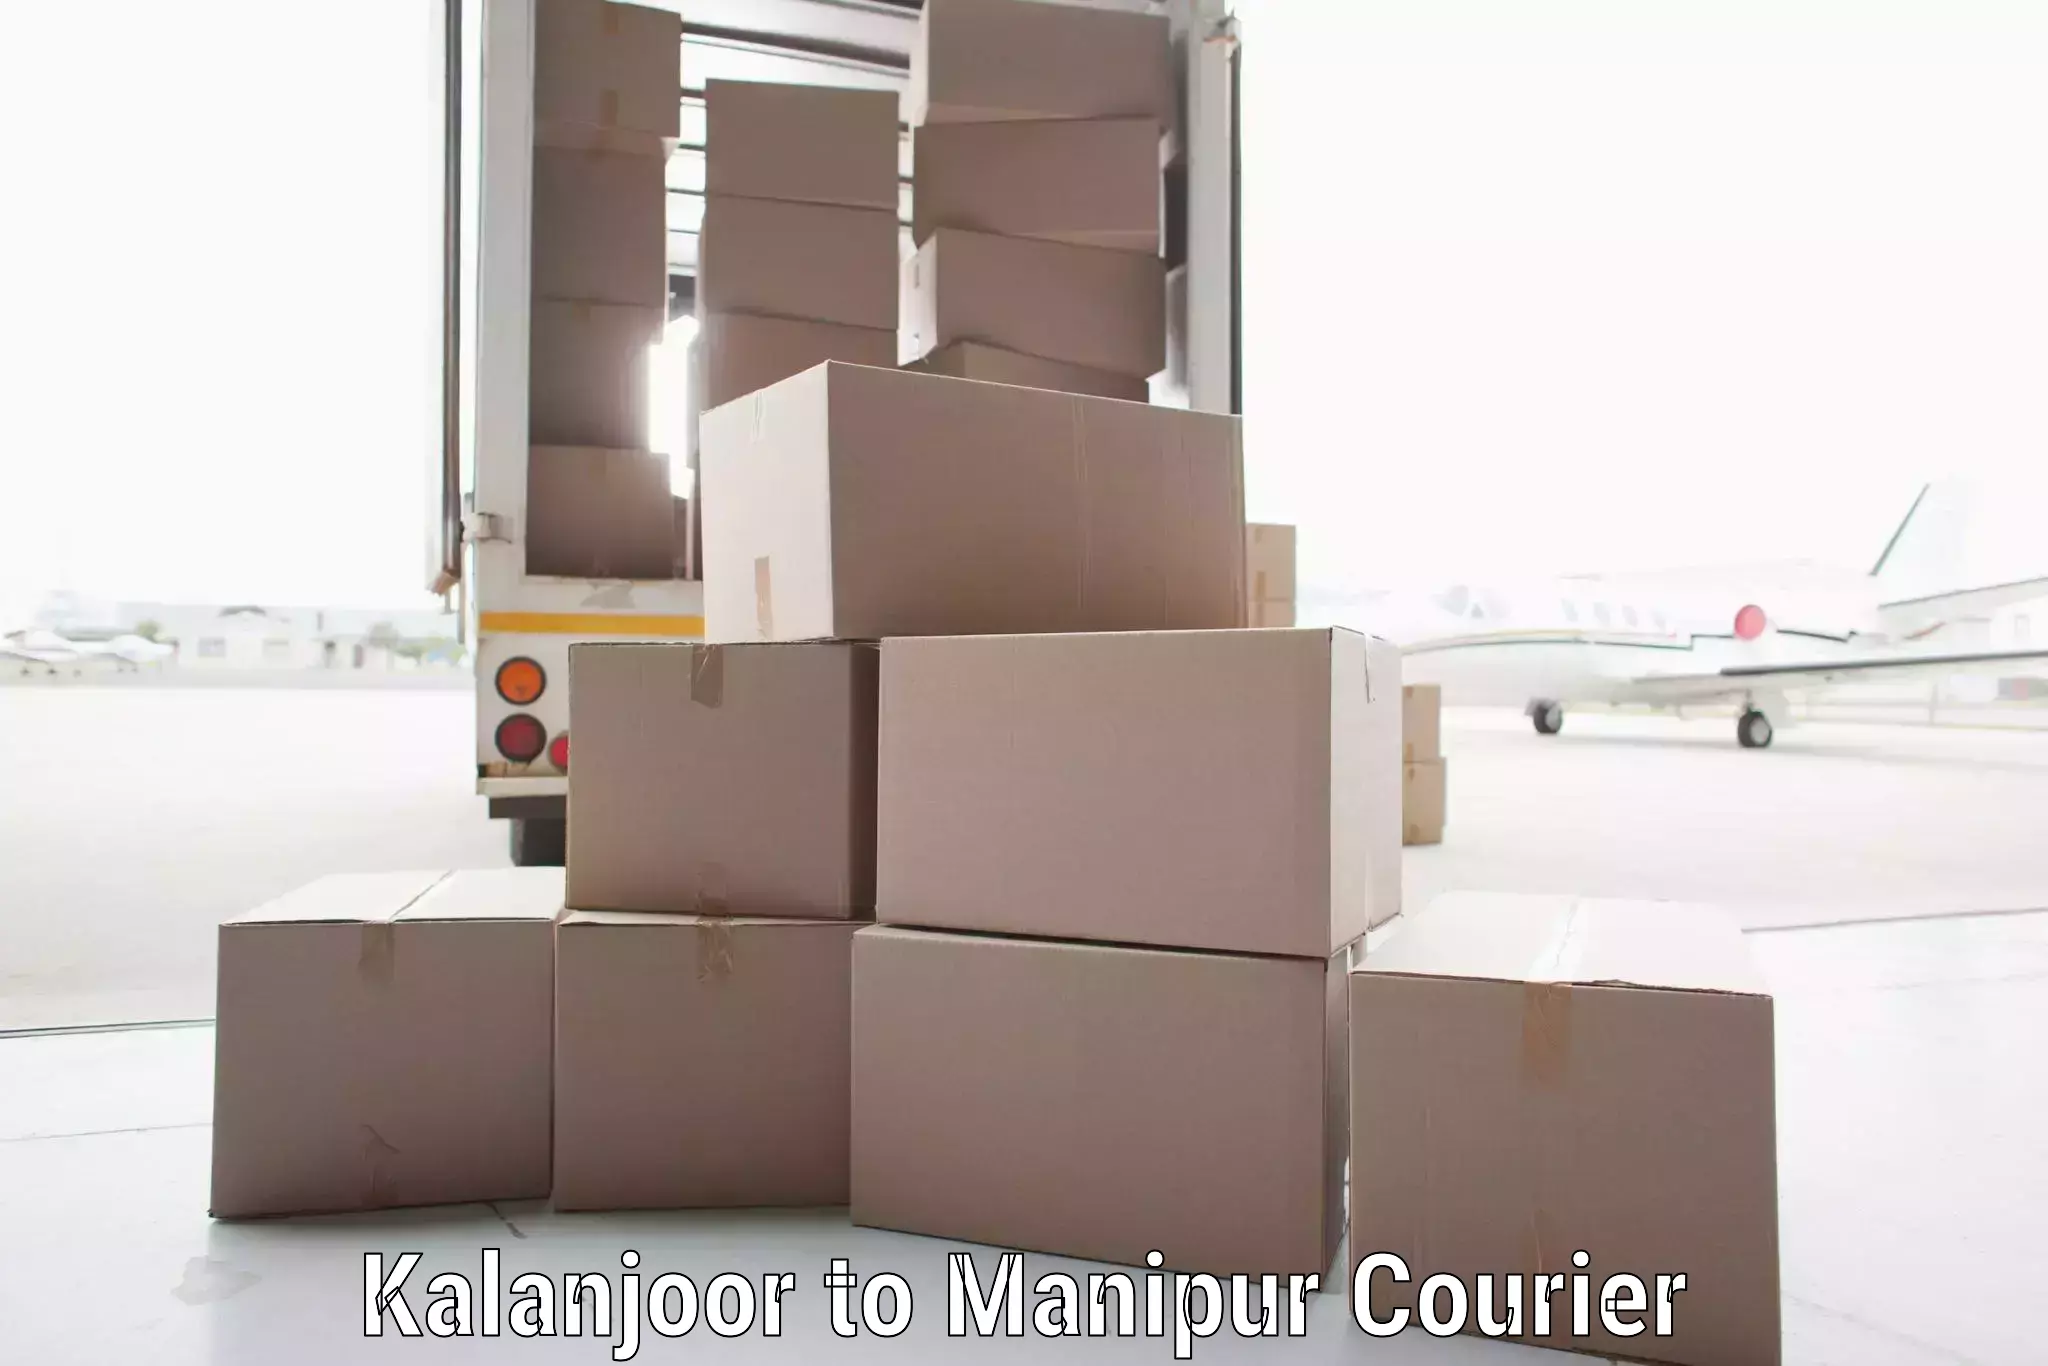 End-to-end delivery in Kalanjoor to Thoubal